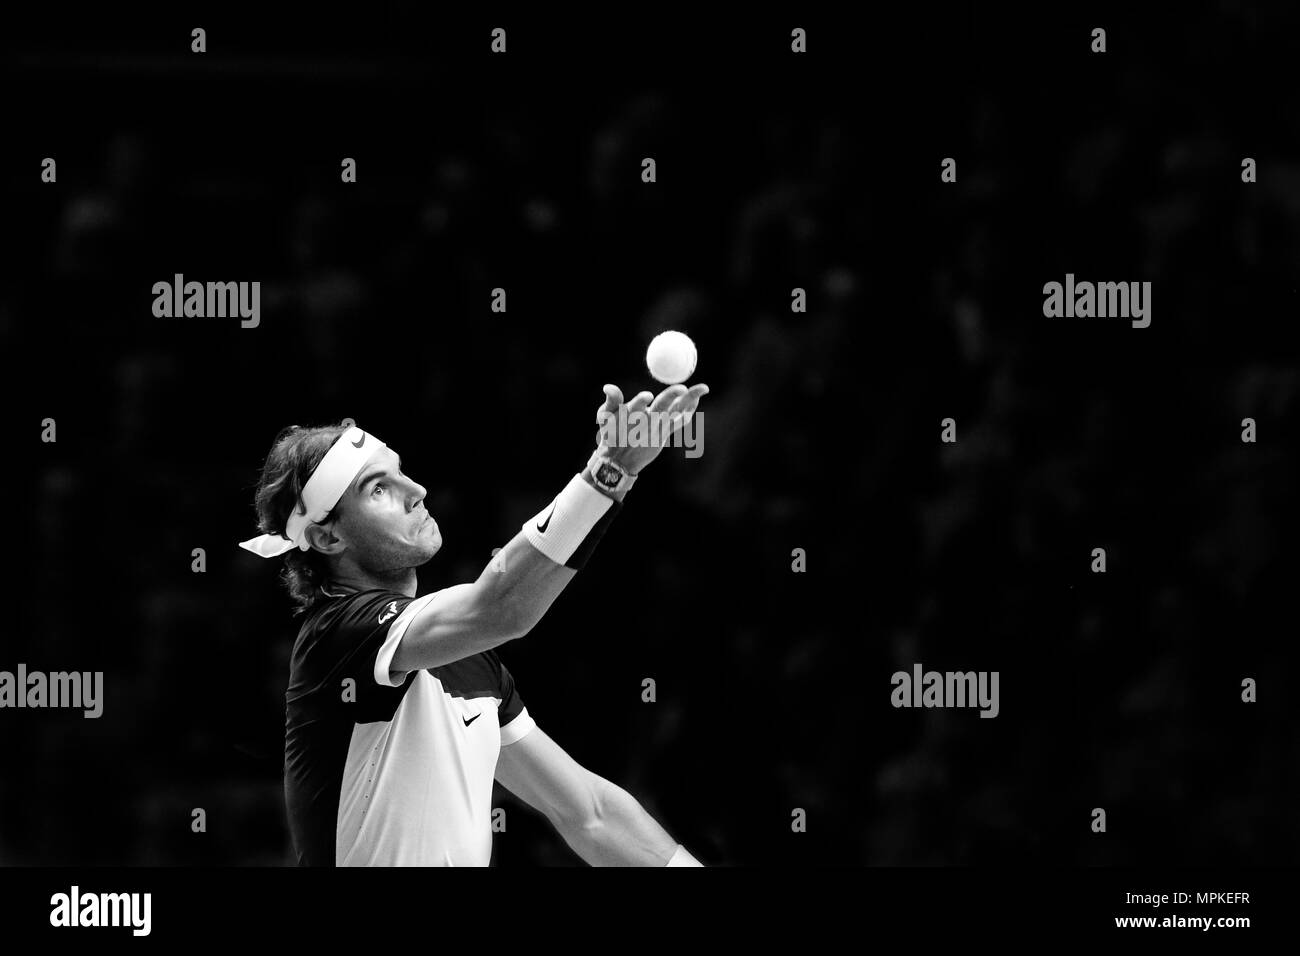 Andy Murray vs Rafael Nadal during Day 4 of the 2015 Barclays ATP World Tour Finals - O2 Arena London England. 18 November 2015  --- Image by © Paul Cunningham Stock Photo